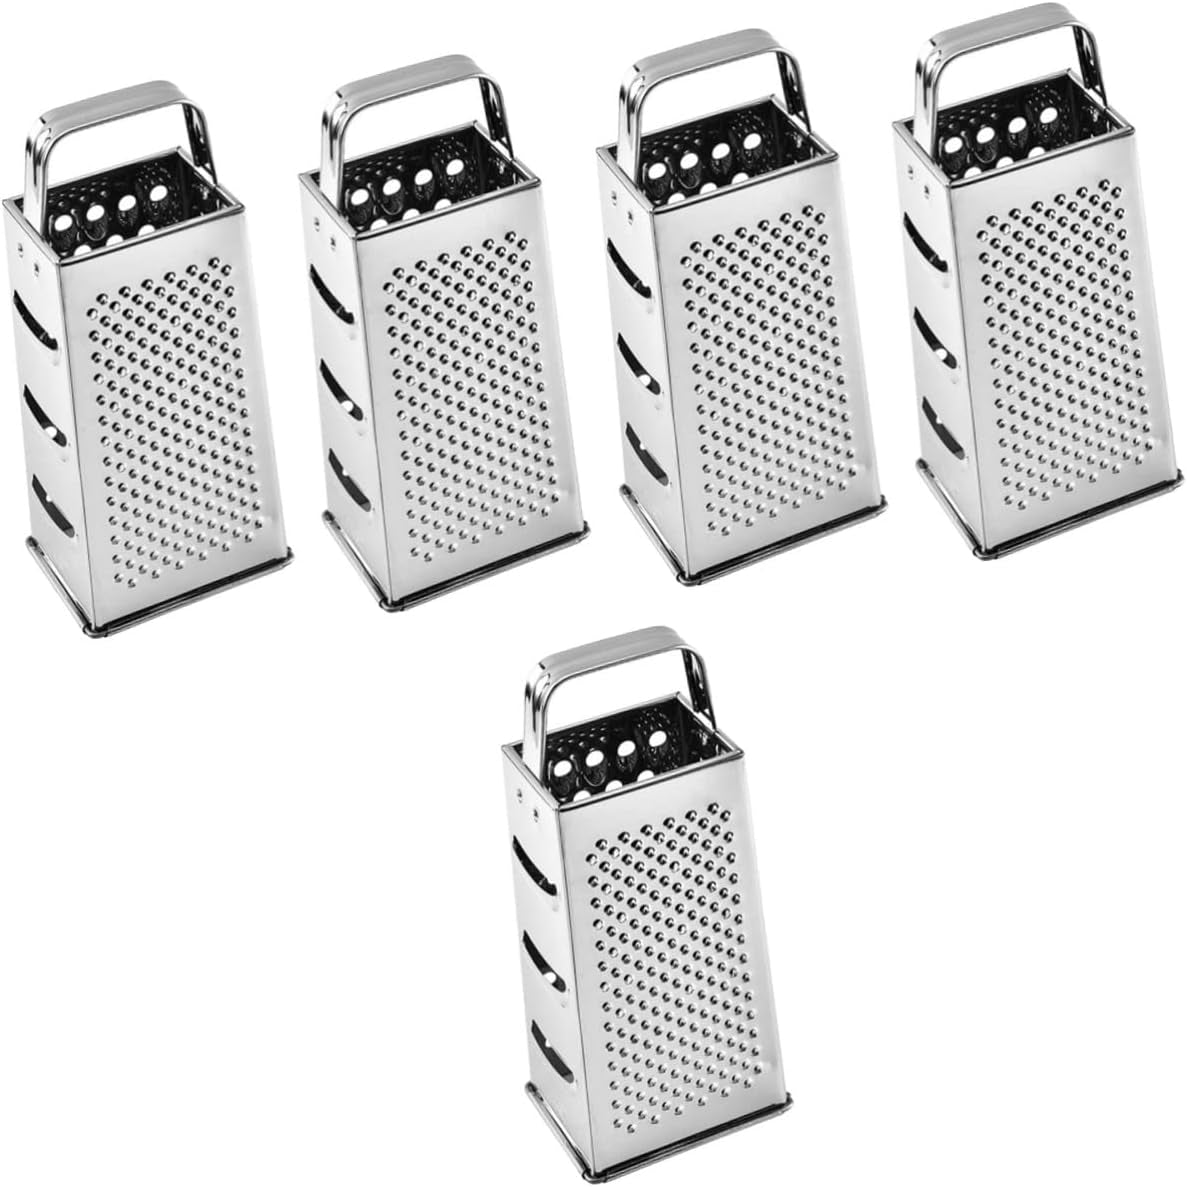 Luxshiny with Handle Kitchen for Steel Stainless Manual Lemon Foods Inch Multi-Use Grinding Cheese Nuts Grating Tool Food Zester Garlic Butter Chocolate Graters Handheld Vegetable Ginger  Luxshiny Silverx5Pcs 16.5X8.8X6.3Cmx5Pcs 